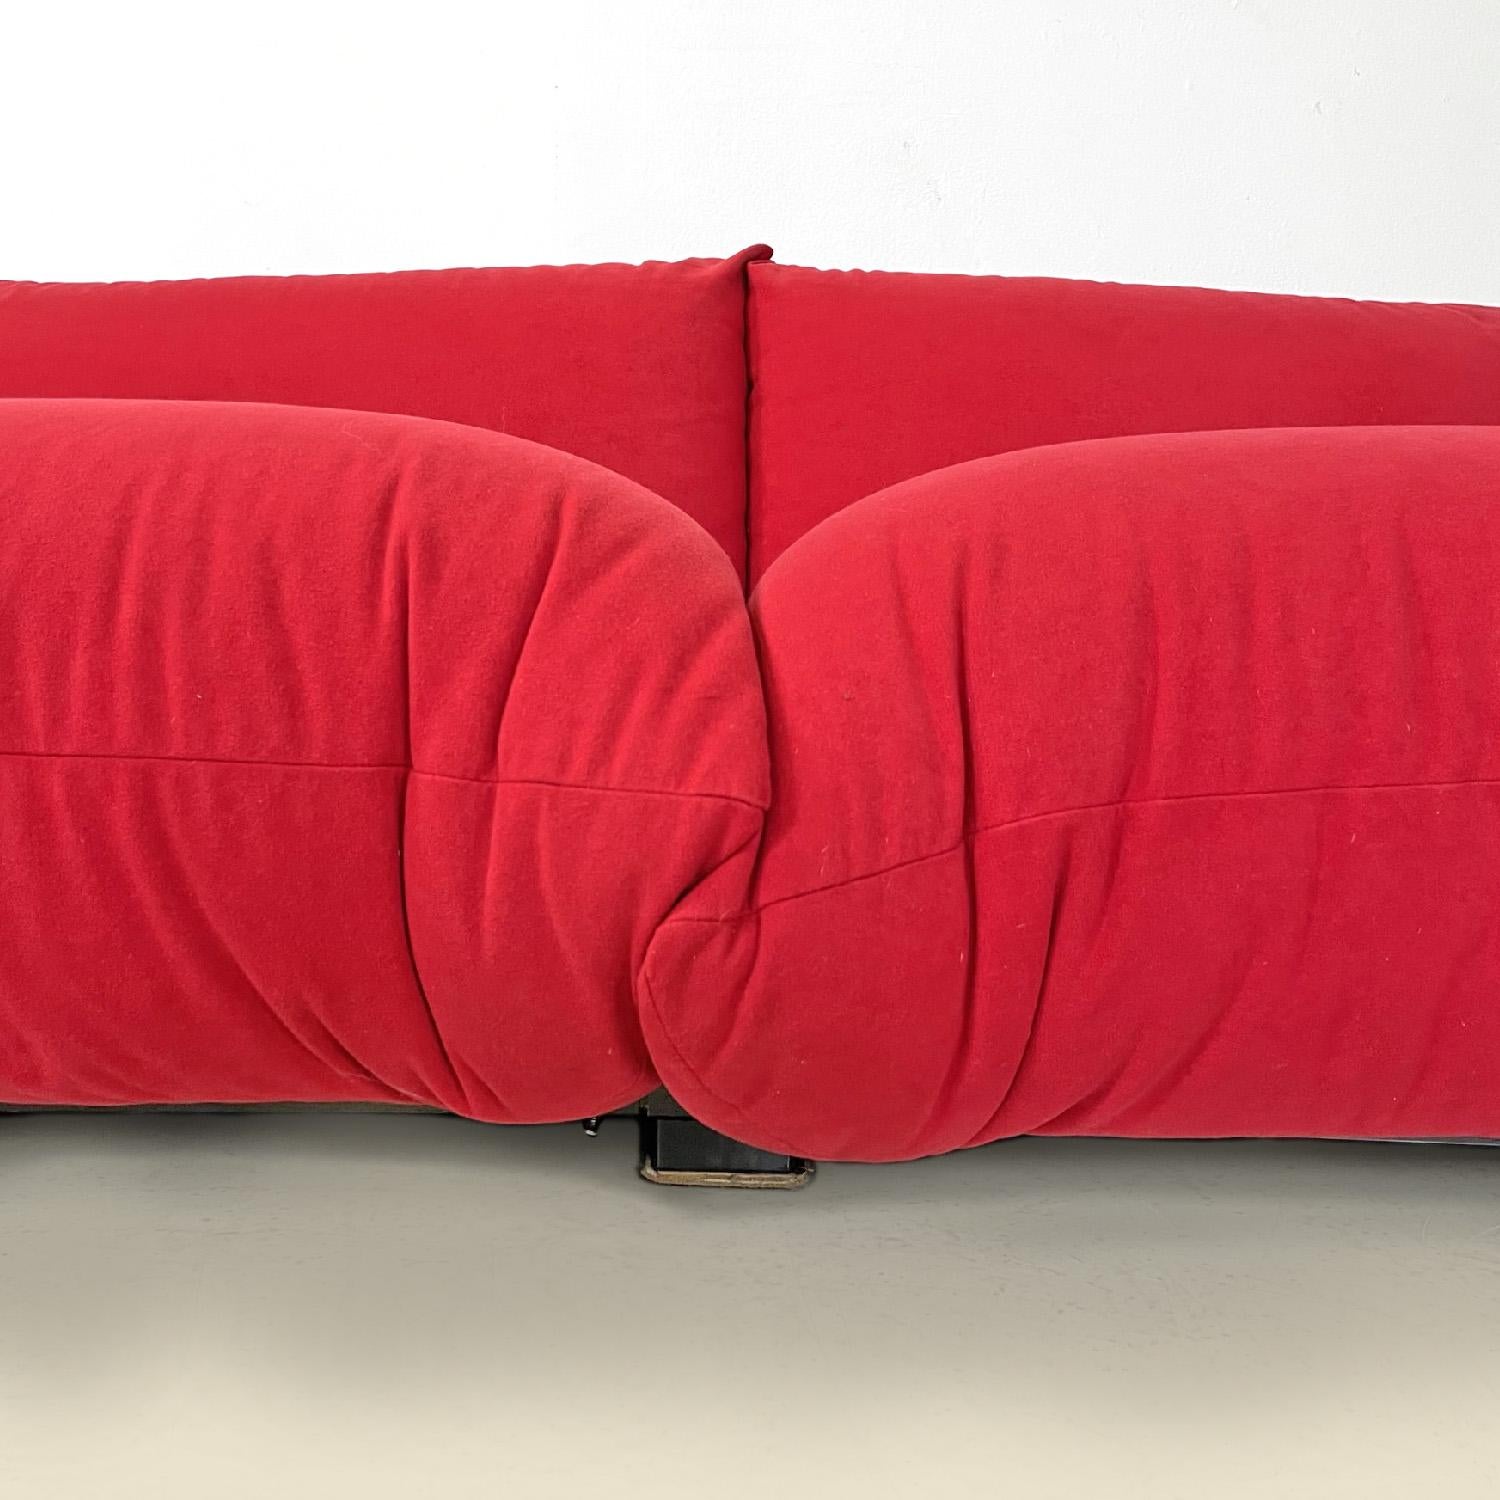 Metal Italian modern red sofas Marenco by Mario Marenco for Arflex, 1970s For Sale